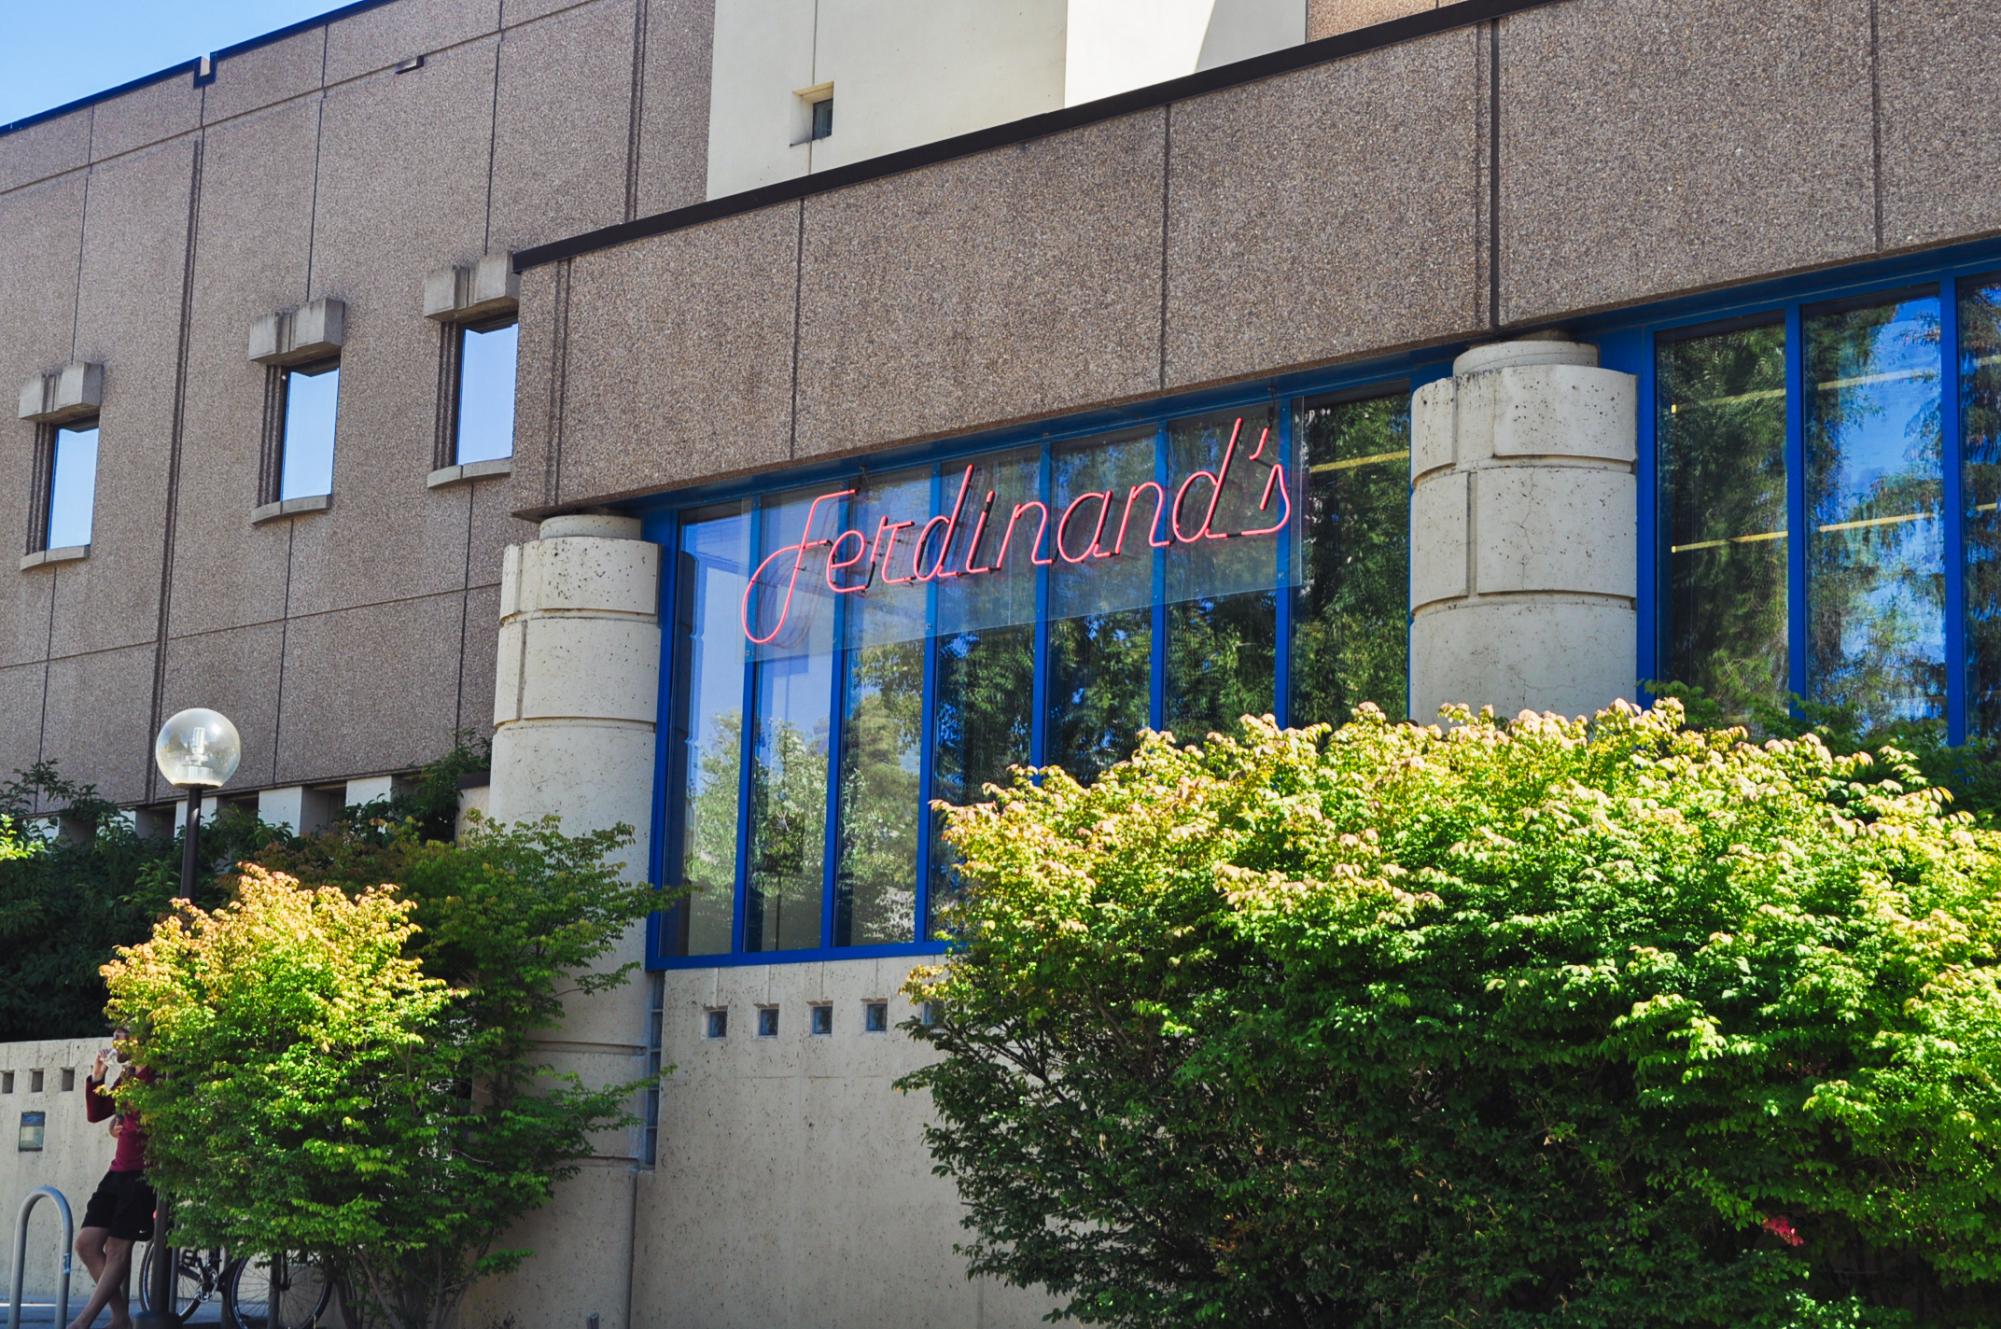 Ferdinand’s current location, where it has been since moving from Troy Hall over 30 years ago